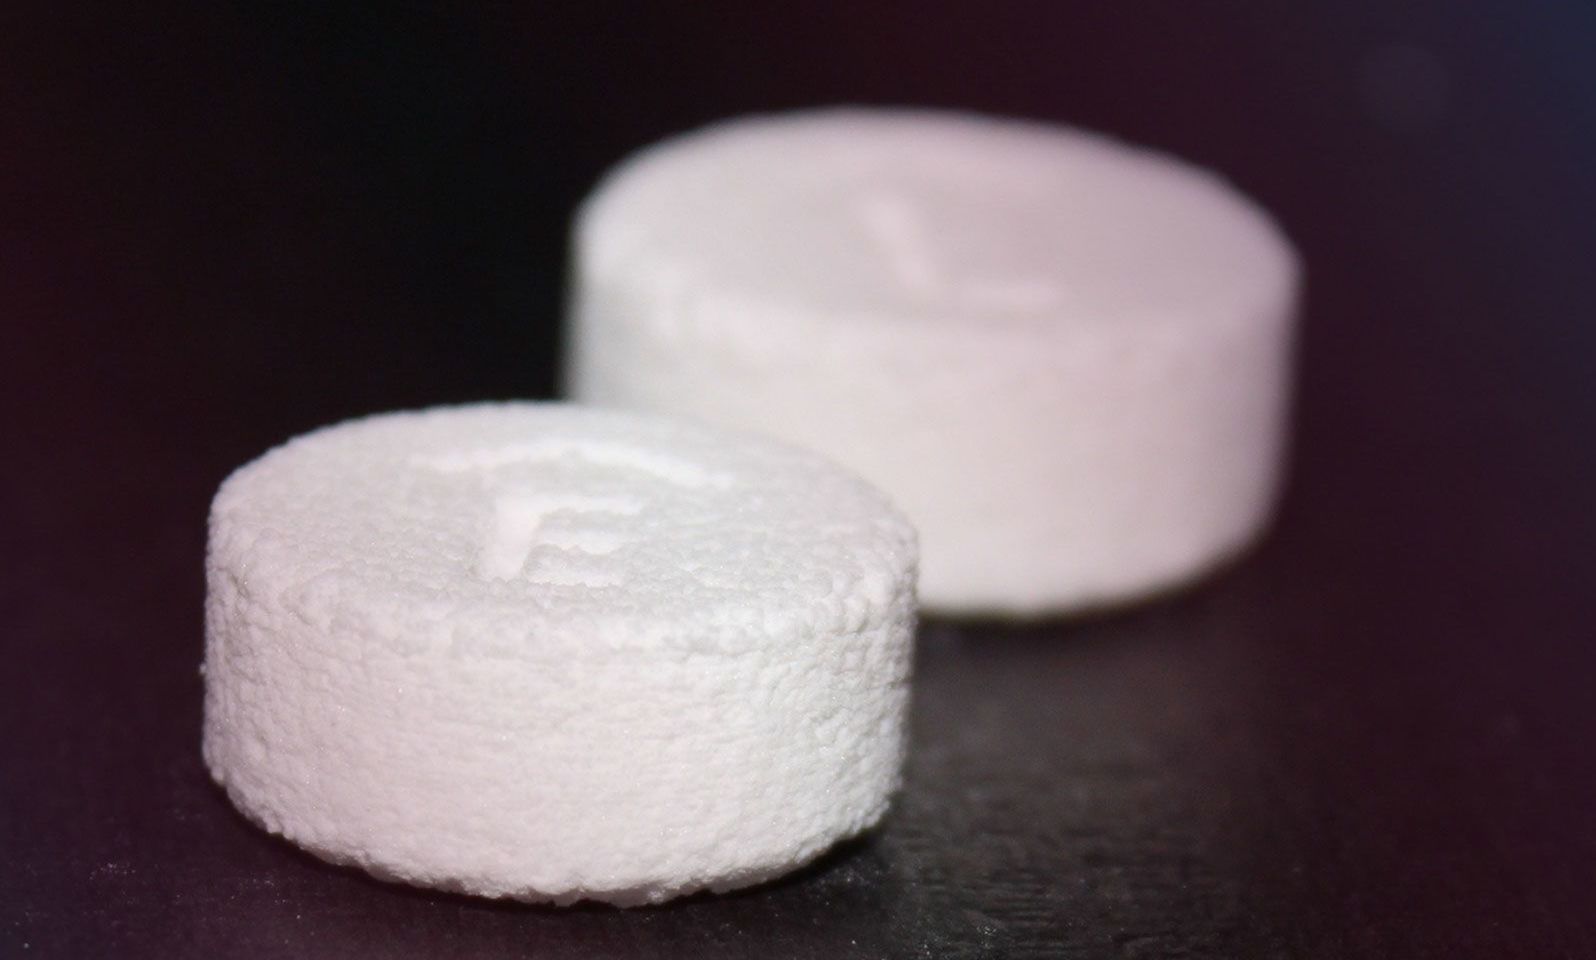 World's first 3D-printed pill: Spritam sets world record (VIDEO)